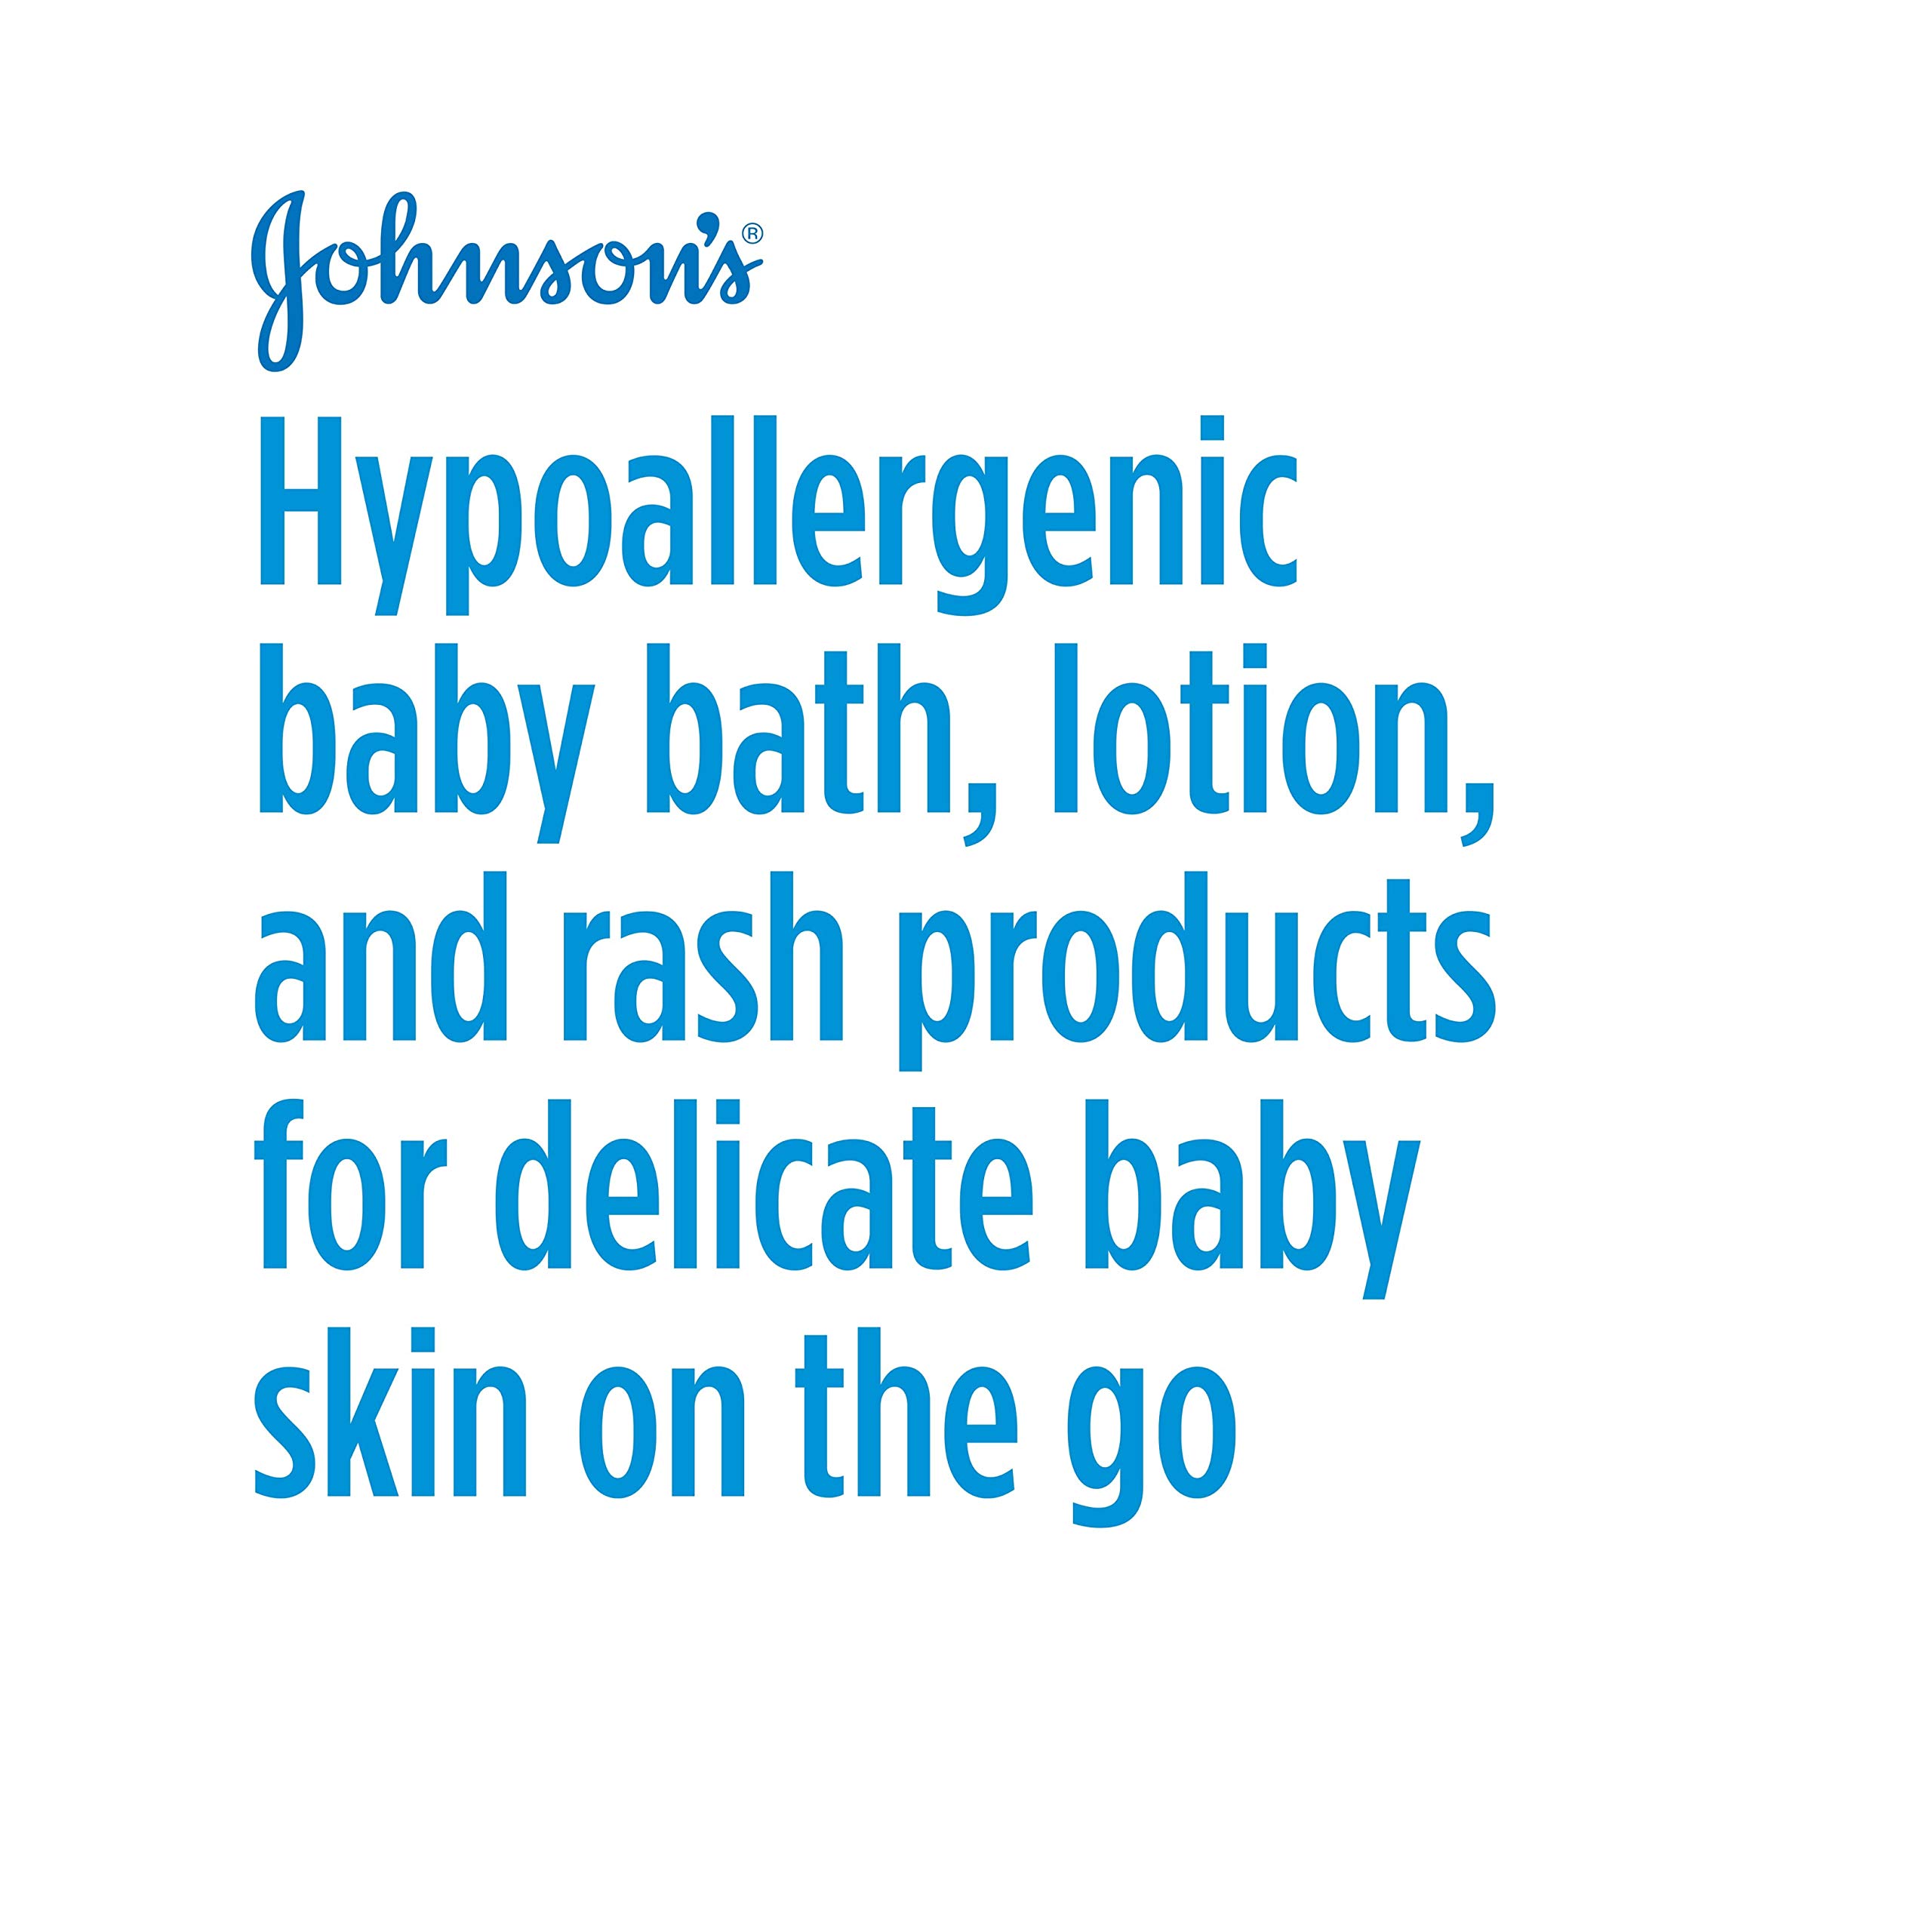 Johnson's Tiny Traveler Baby Gift Set, Baby Bath & Skin Care Essential Products, TSA-Compliant Baby Gift Set with Lotion, Wash, Rash Cream & Wipes, Hypoallergenic & Paraben-Free, 5 Items